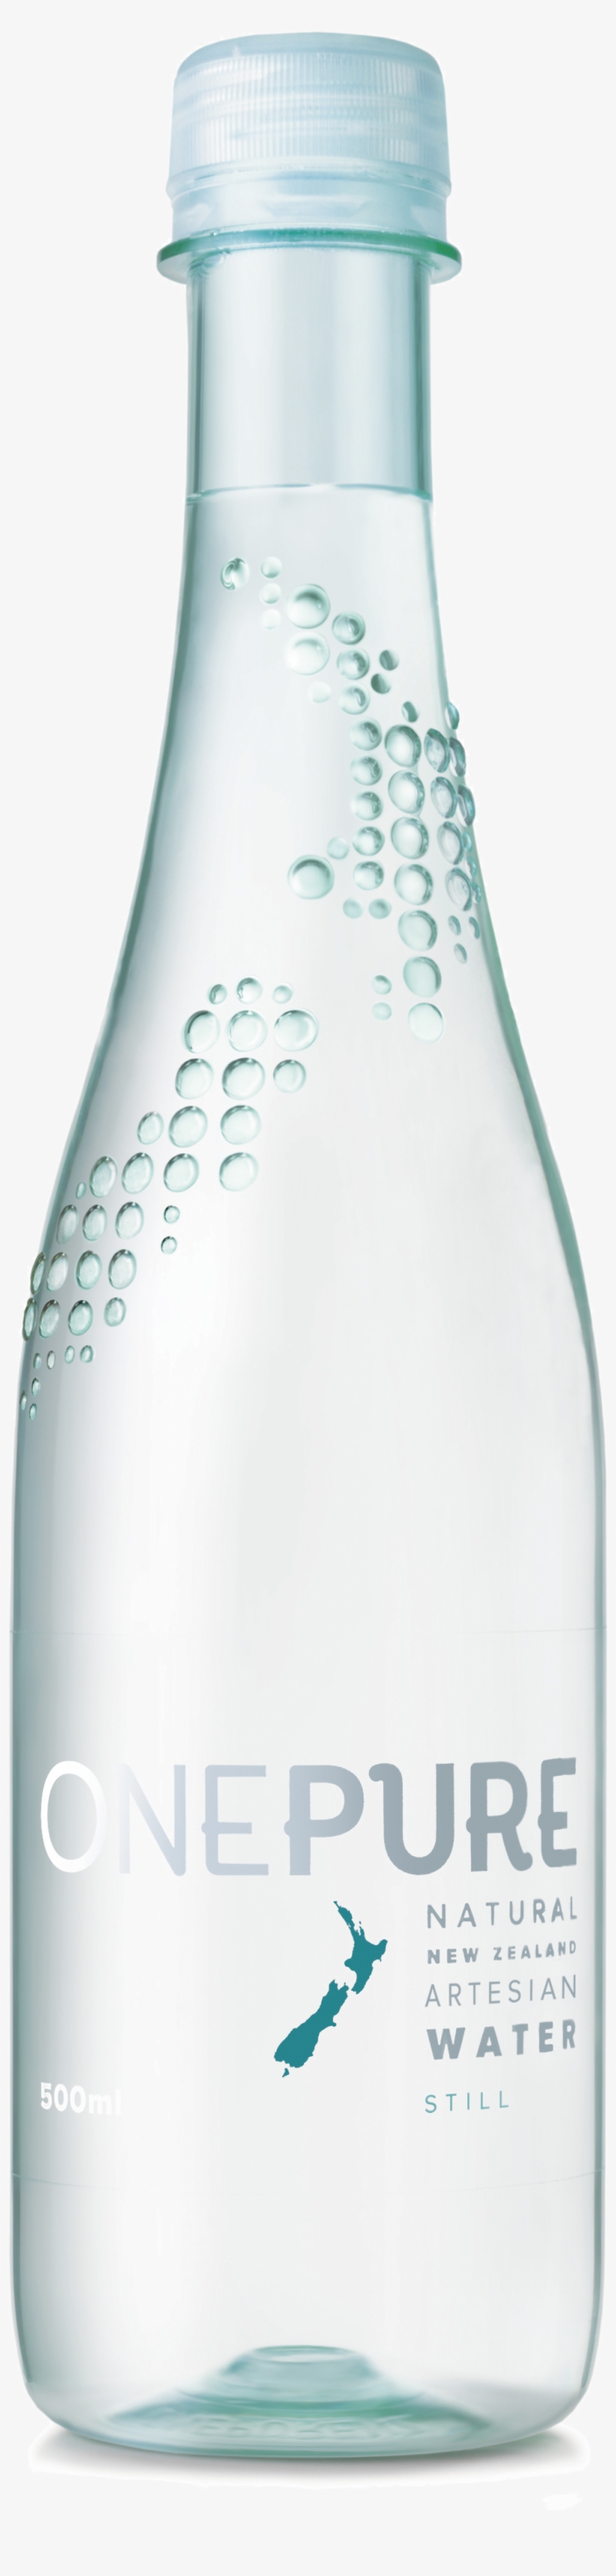 One Pure Still Artesian Water 24 X 500ml Pet Bottle - One Pure, transparent png #7829577